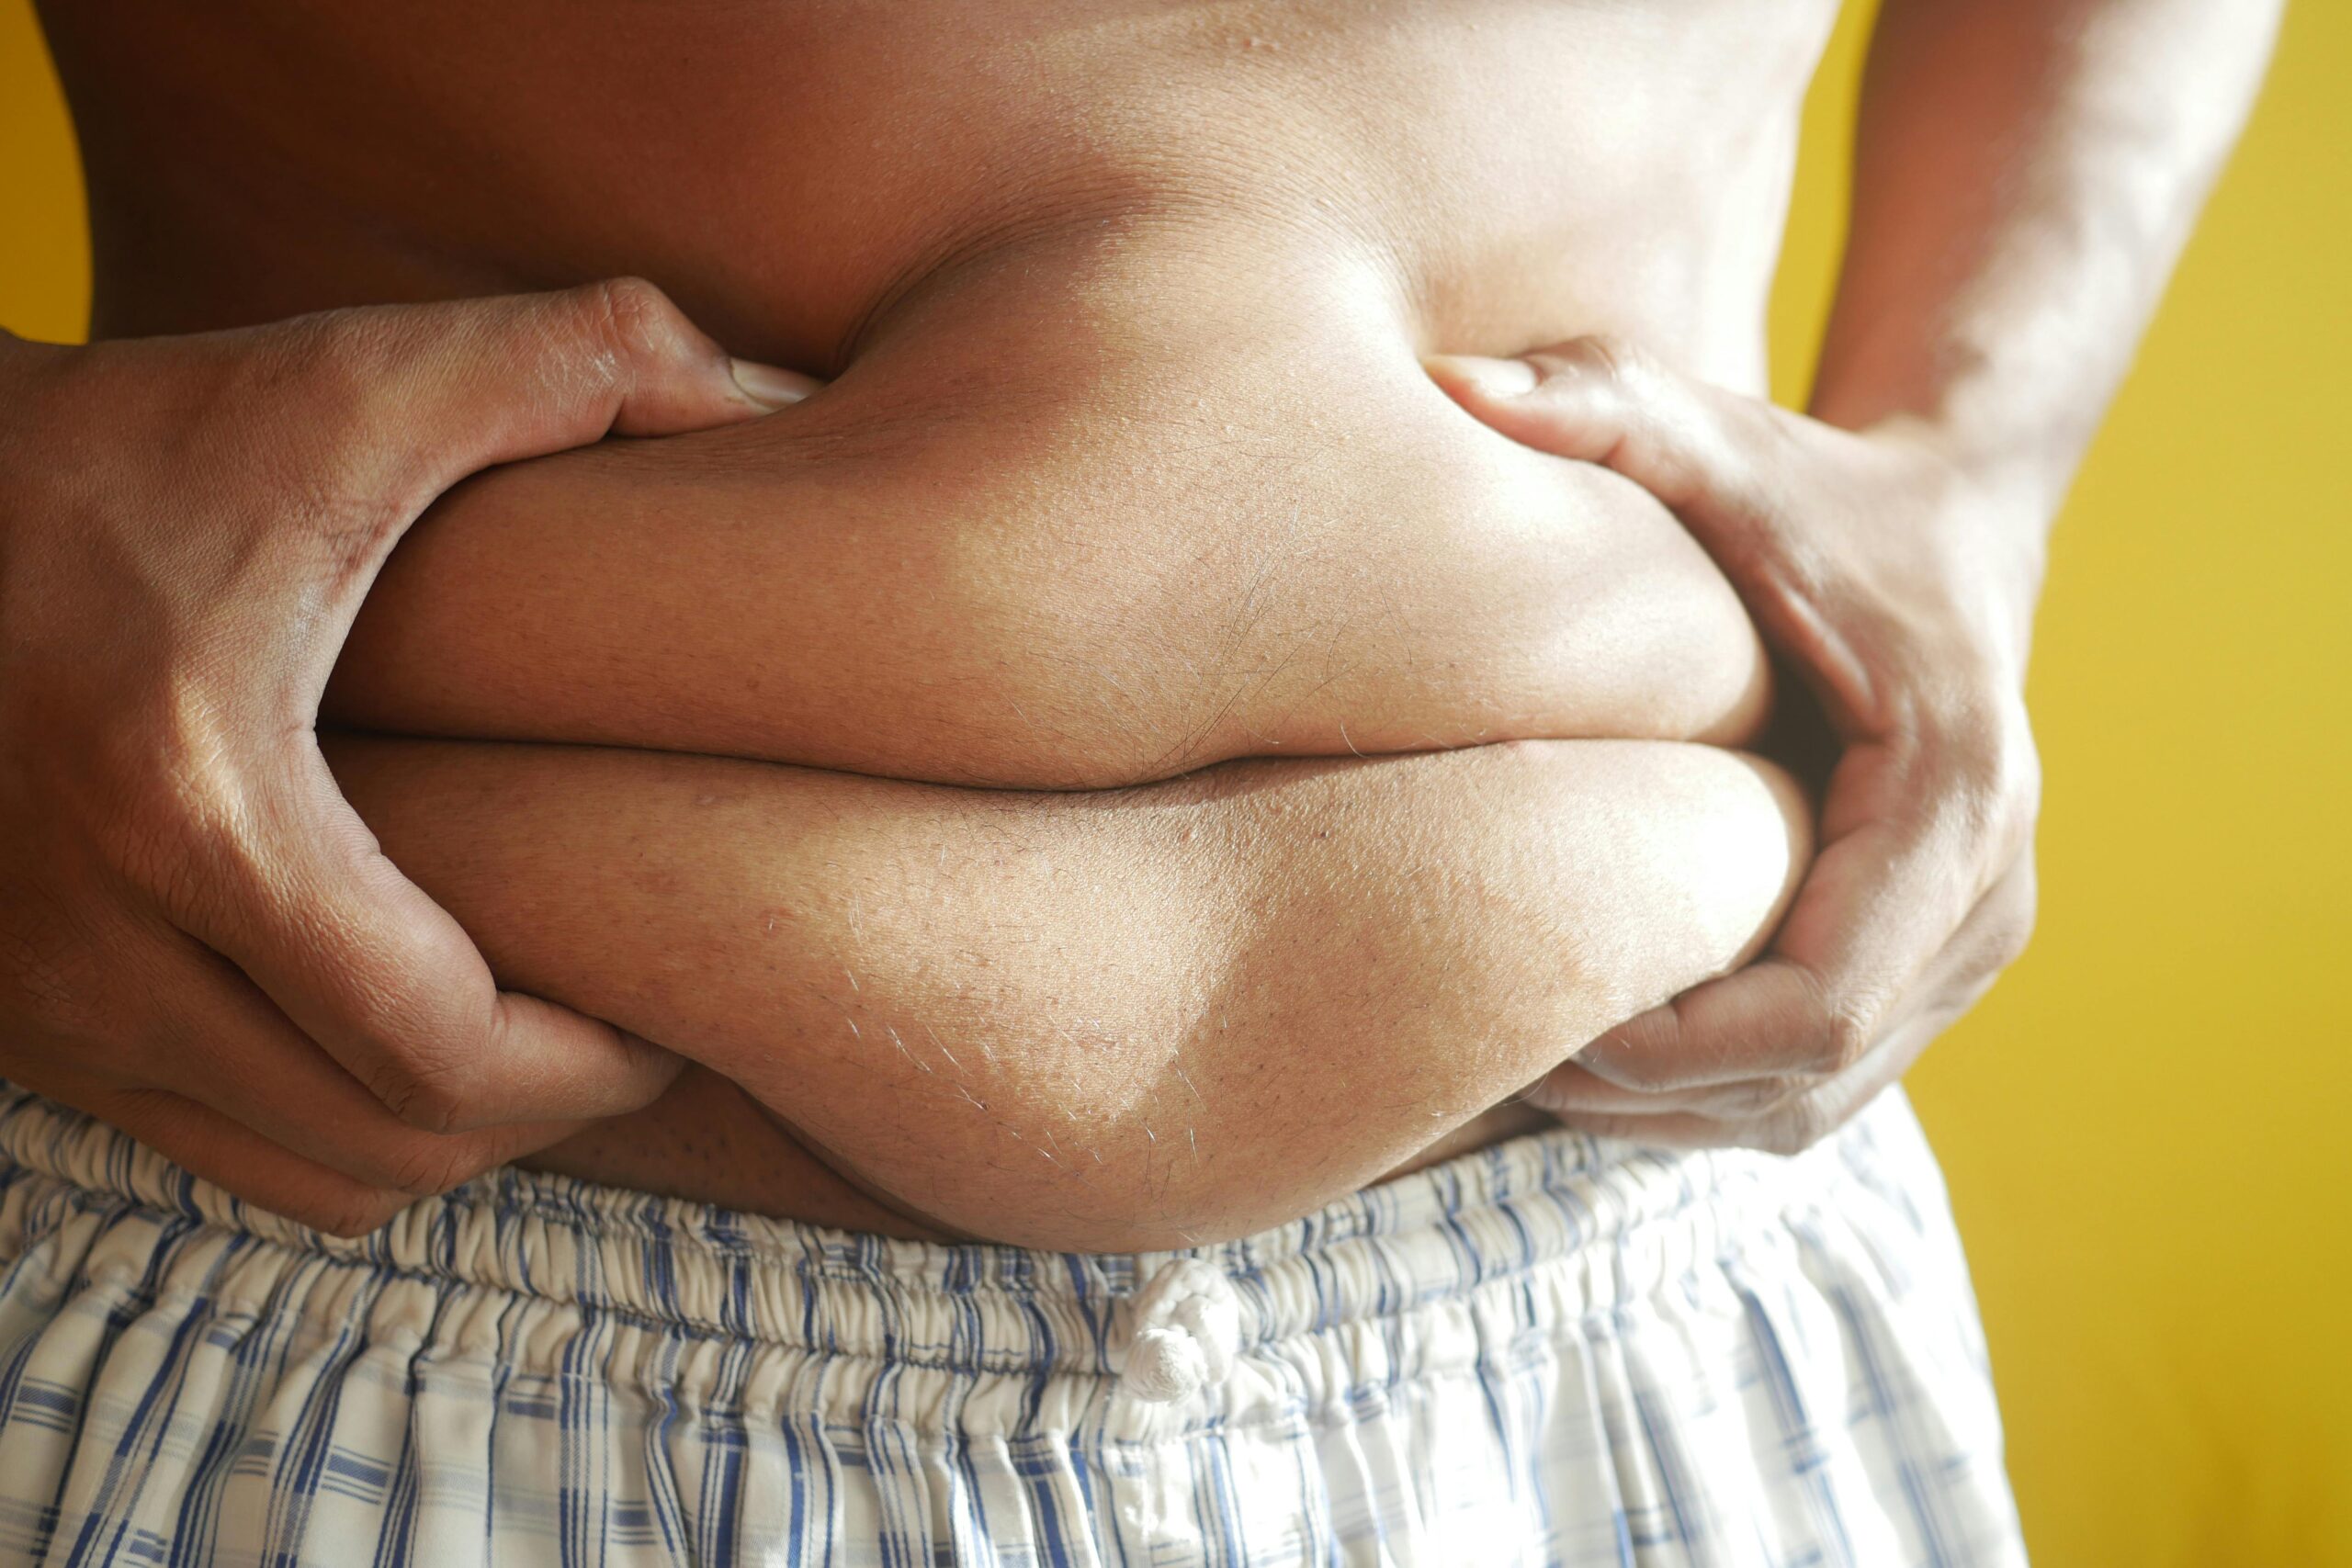 Person holding their abdominal area